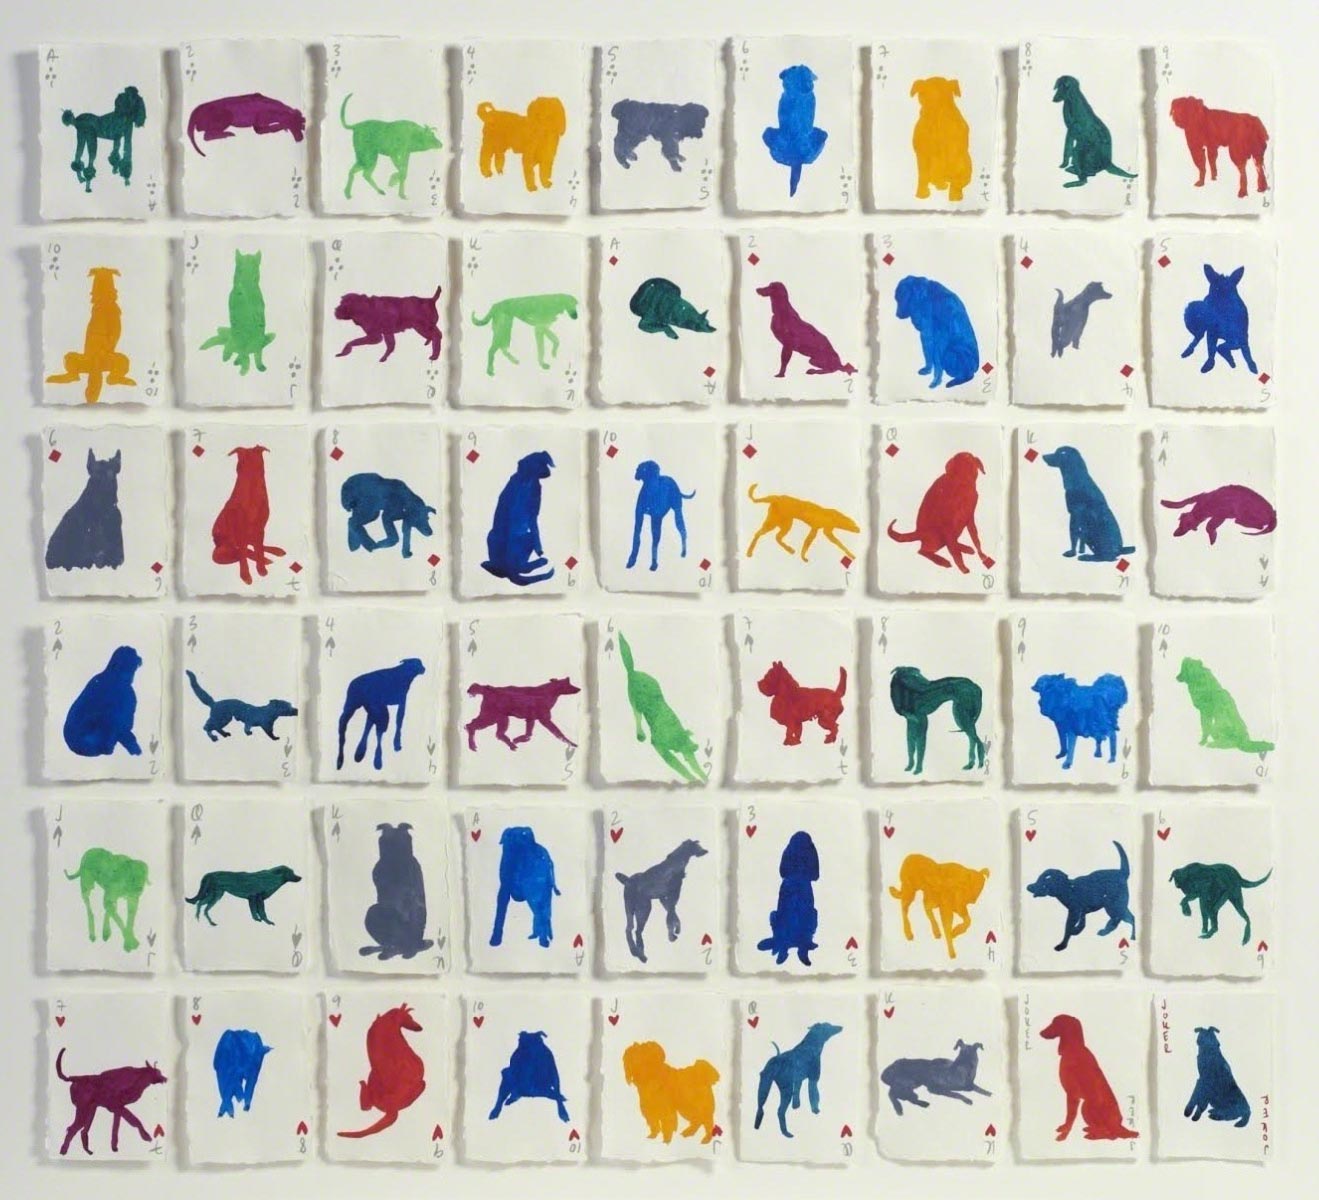 HOLLY FREAN, A Pack of Dogs, 2014